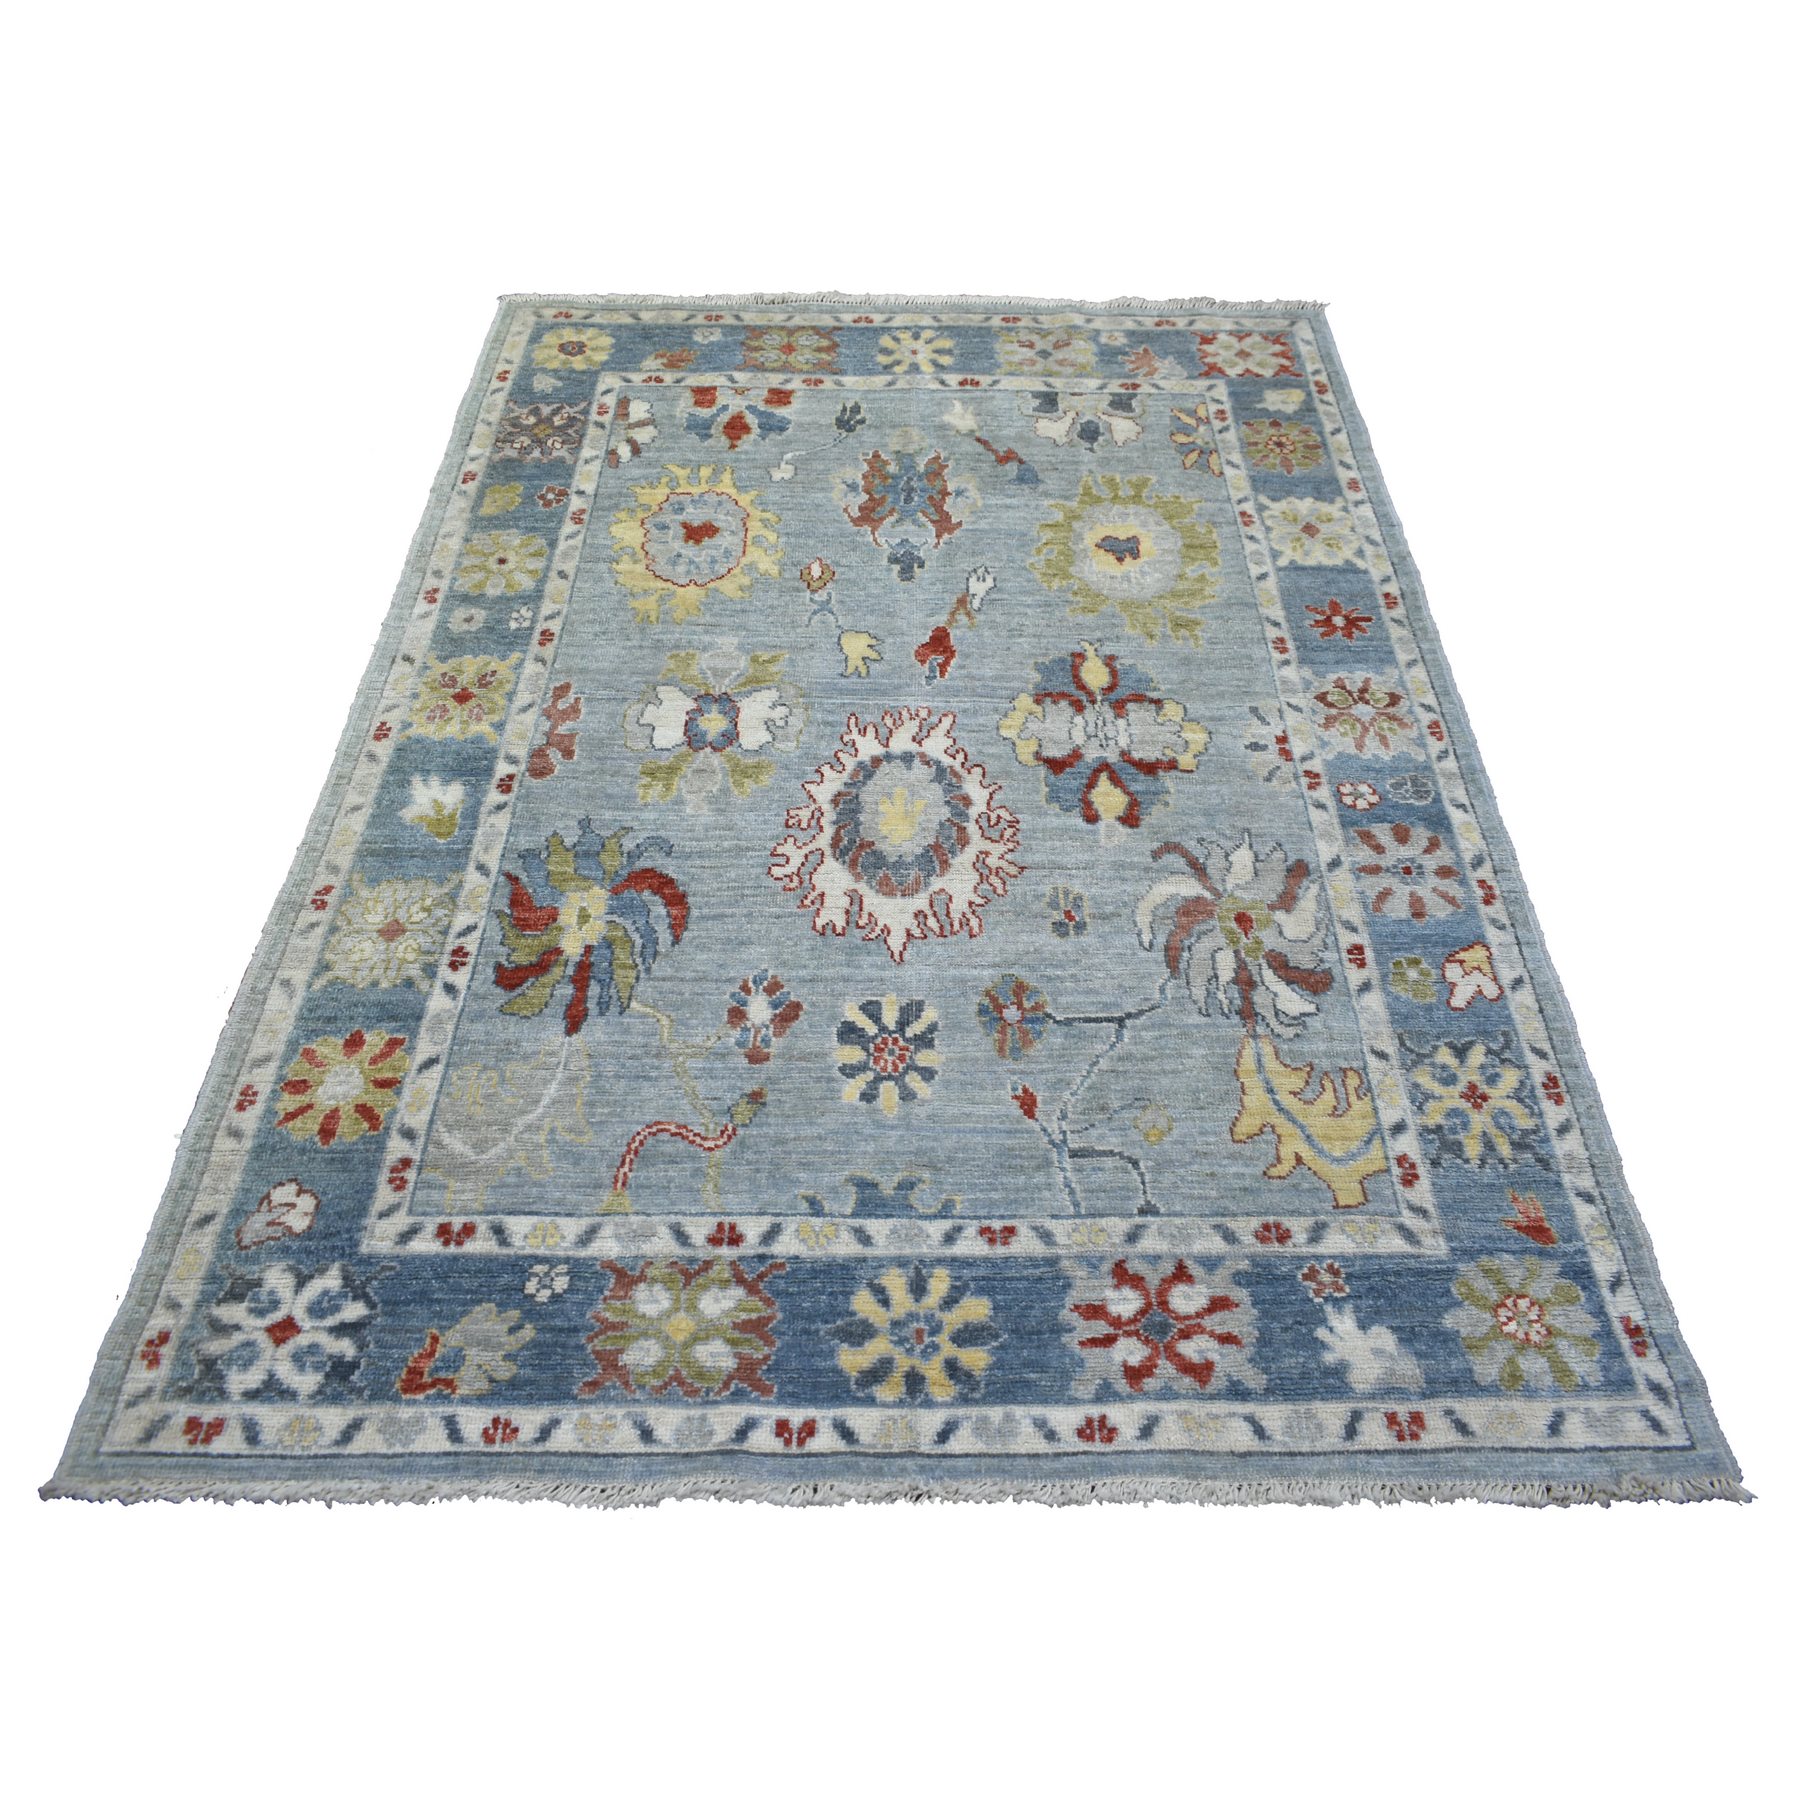 5'1"x6'10" Silver Blue Bold Colors With Leaf Design Natural Dyes, Angora Oushak Afghan Wool Hand Woven Oriental Rug 